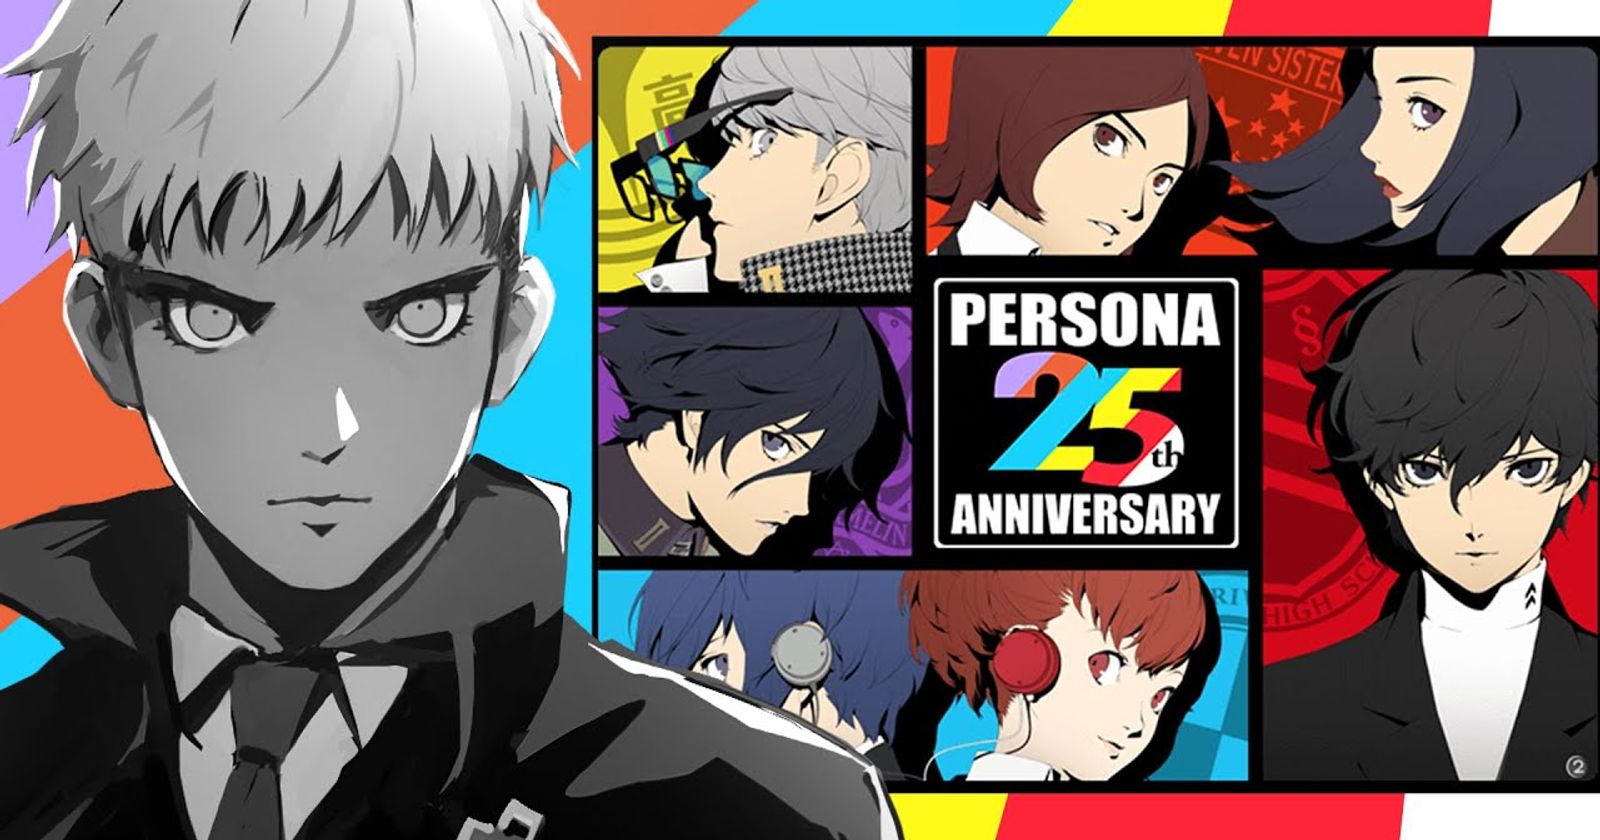 Persona 3 Portable is Getting a Multiplatform Remaster - Rumor